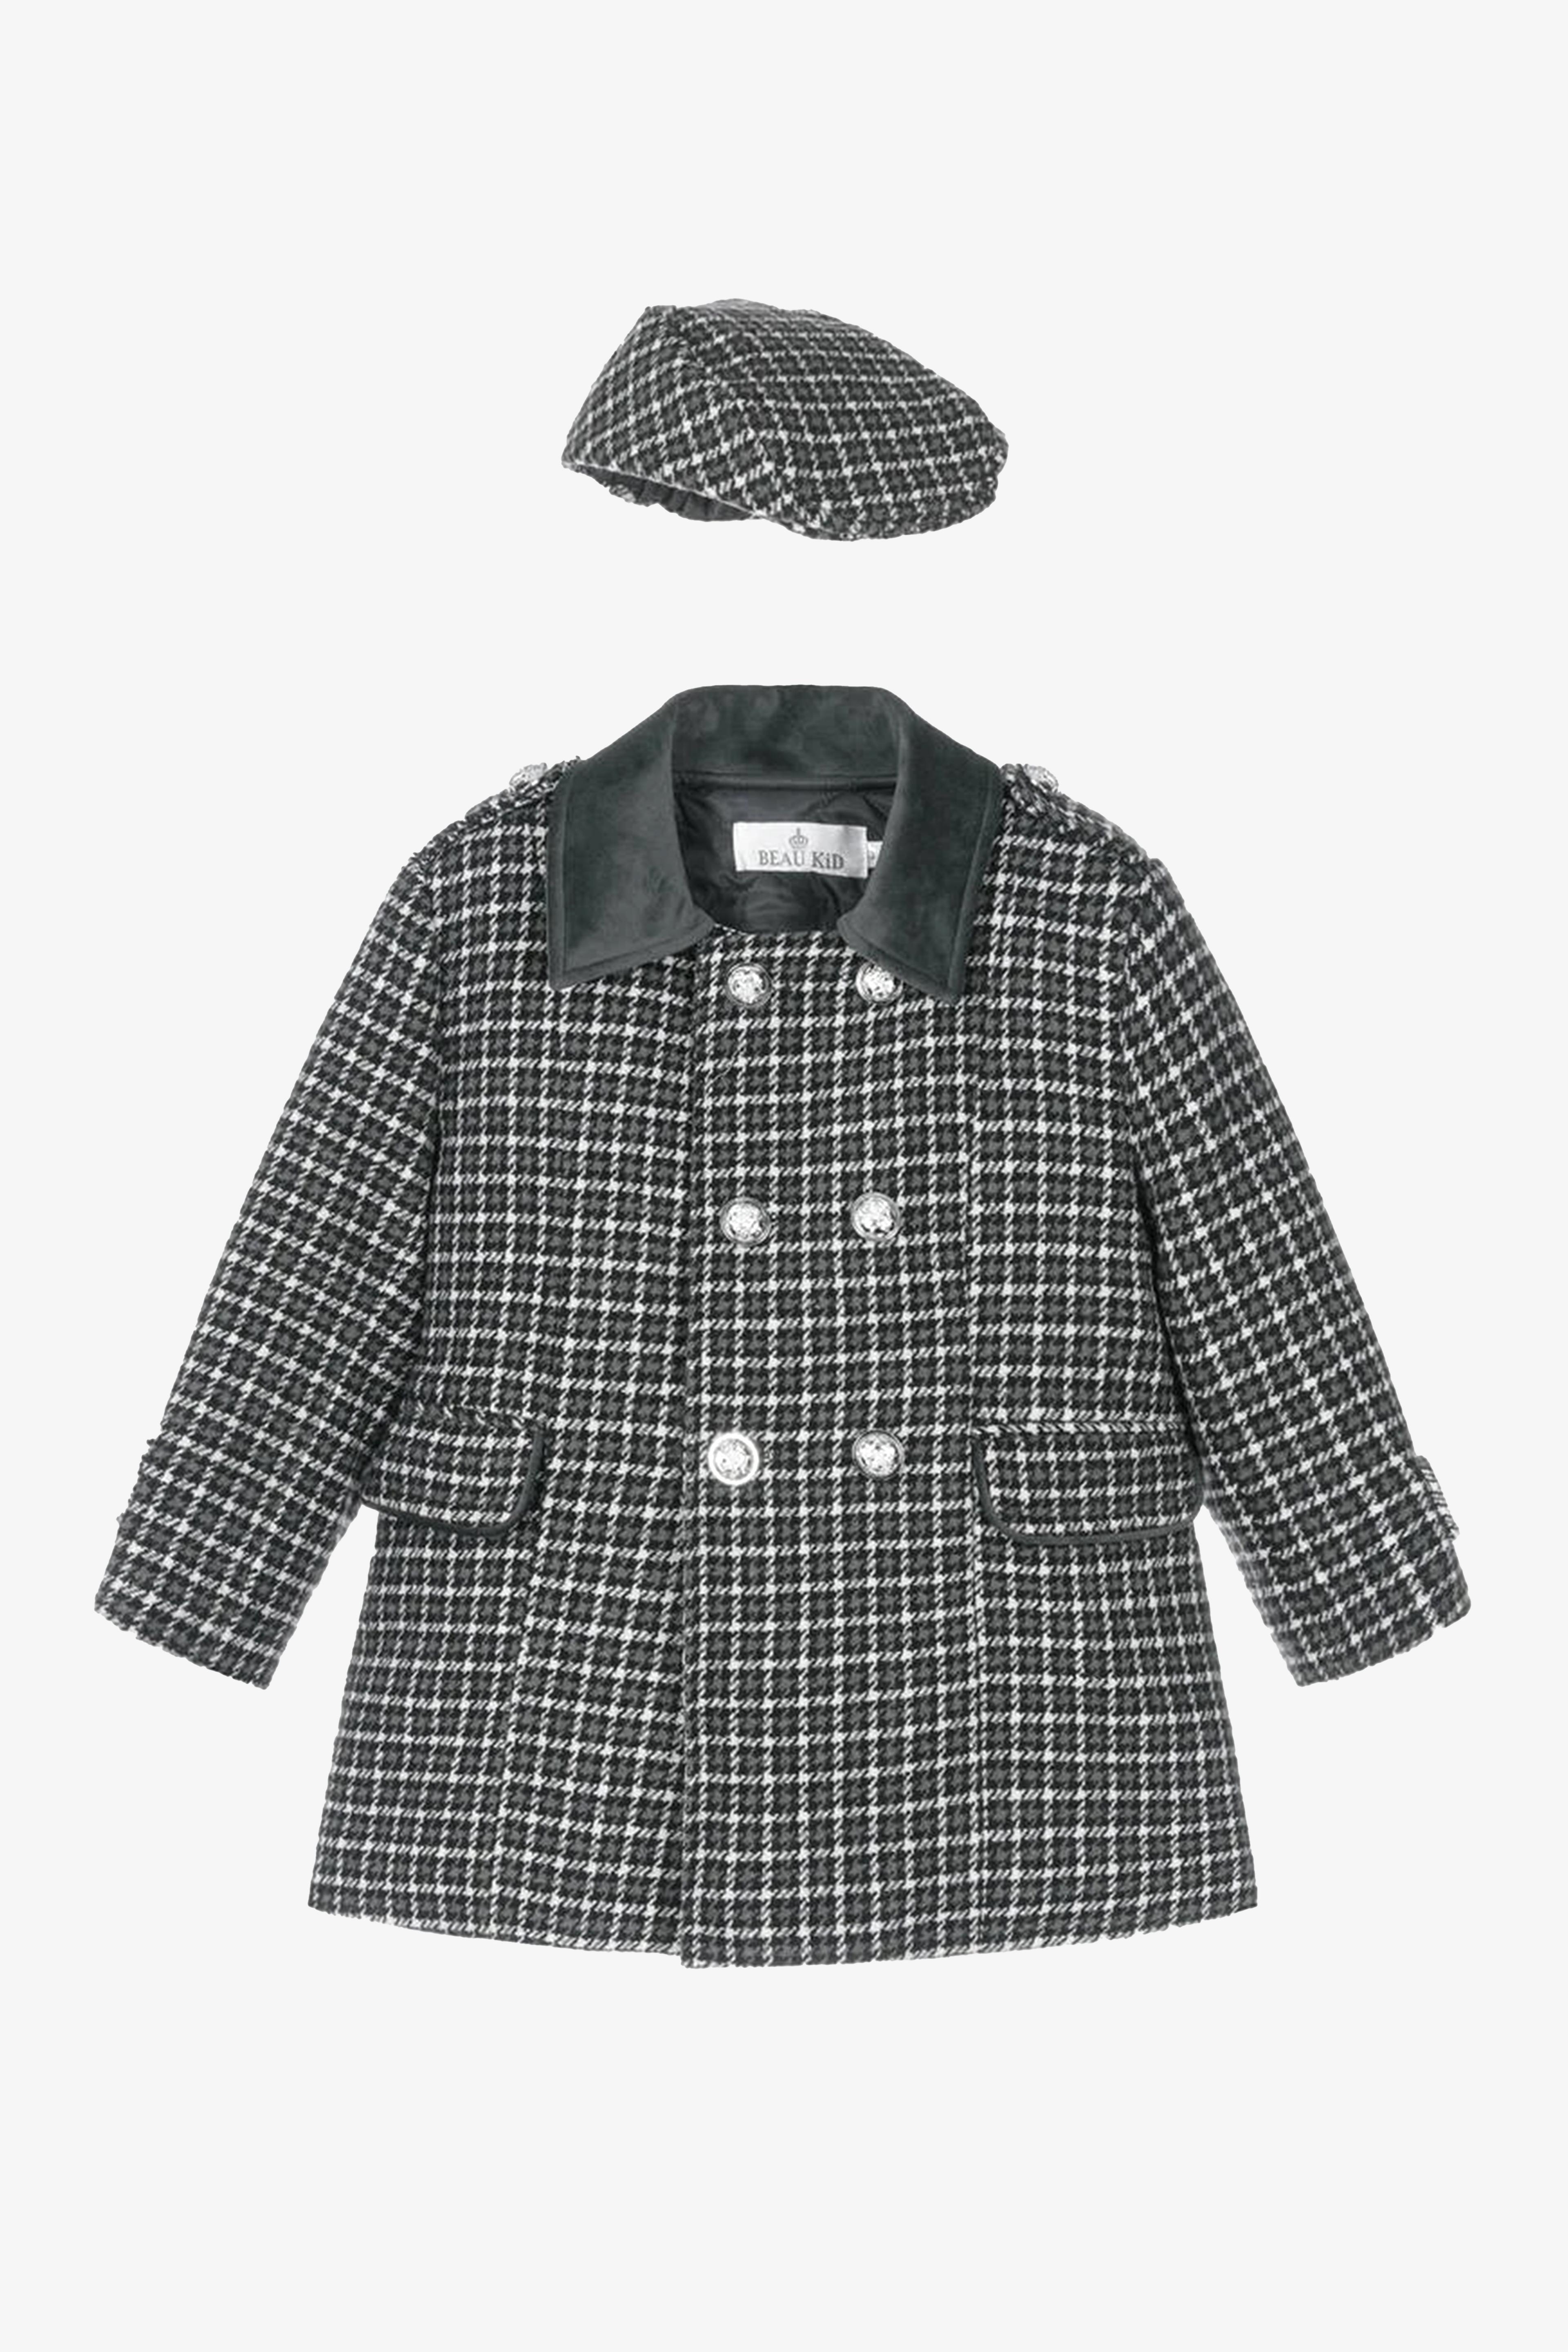 Boys Tweed Houndstooth Pea Coat with Matching Cap